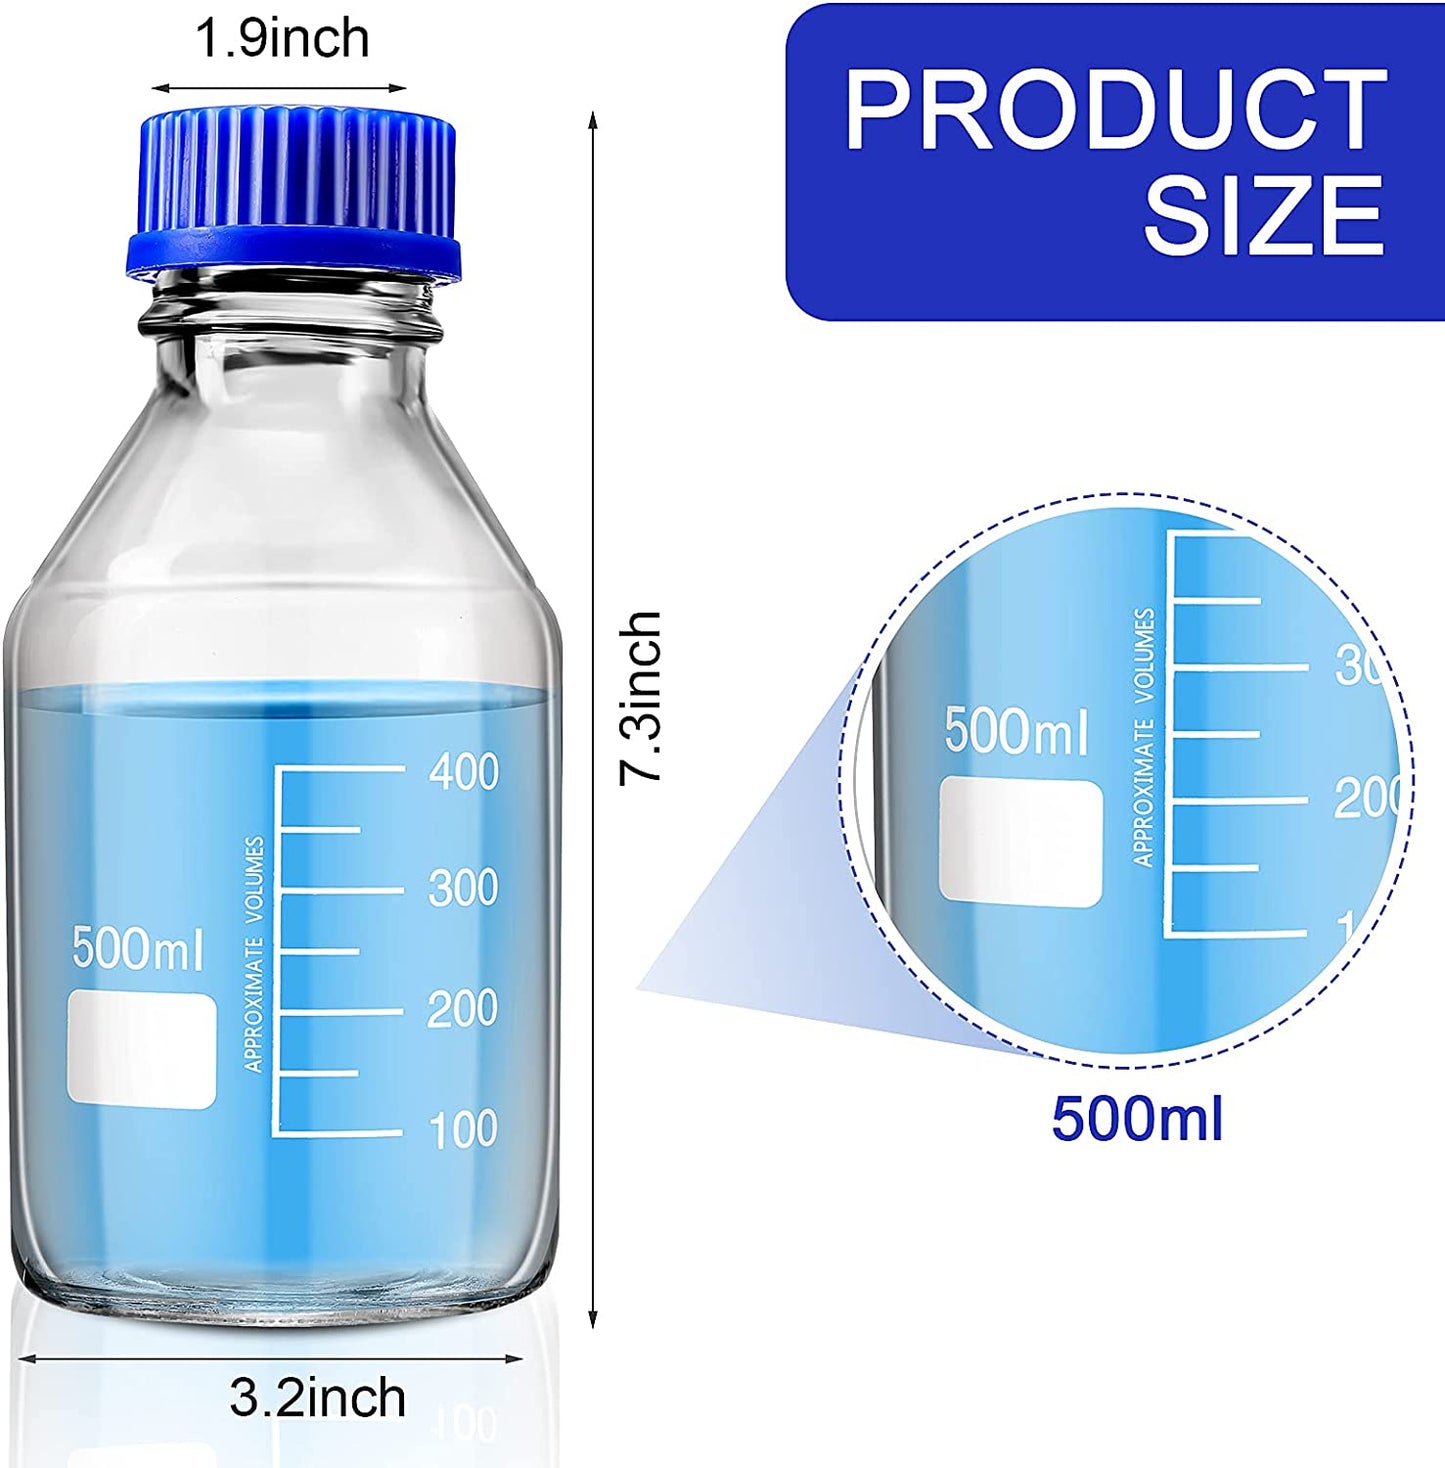 GLASS BOTTLE, 500ML WITH BLUE CAP